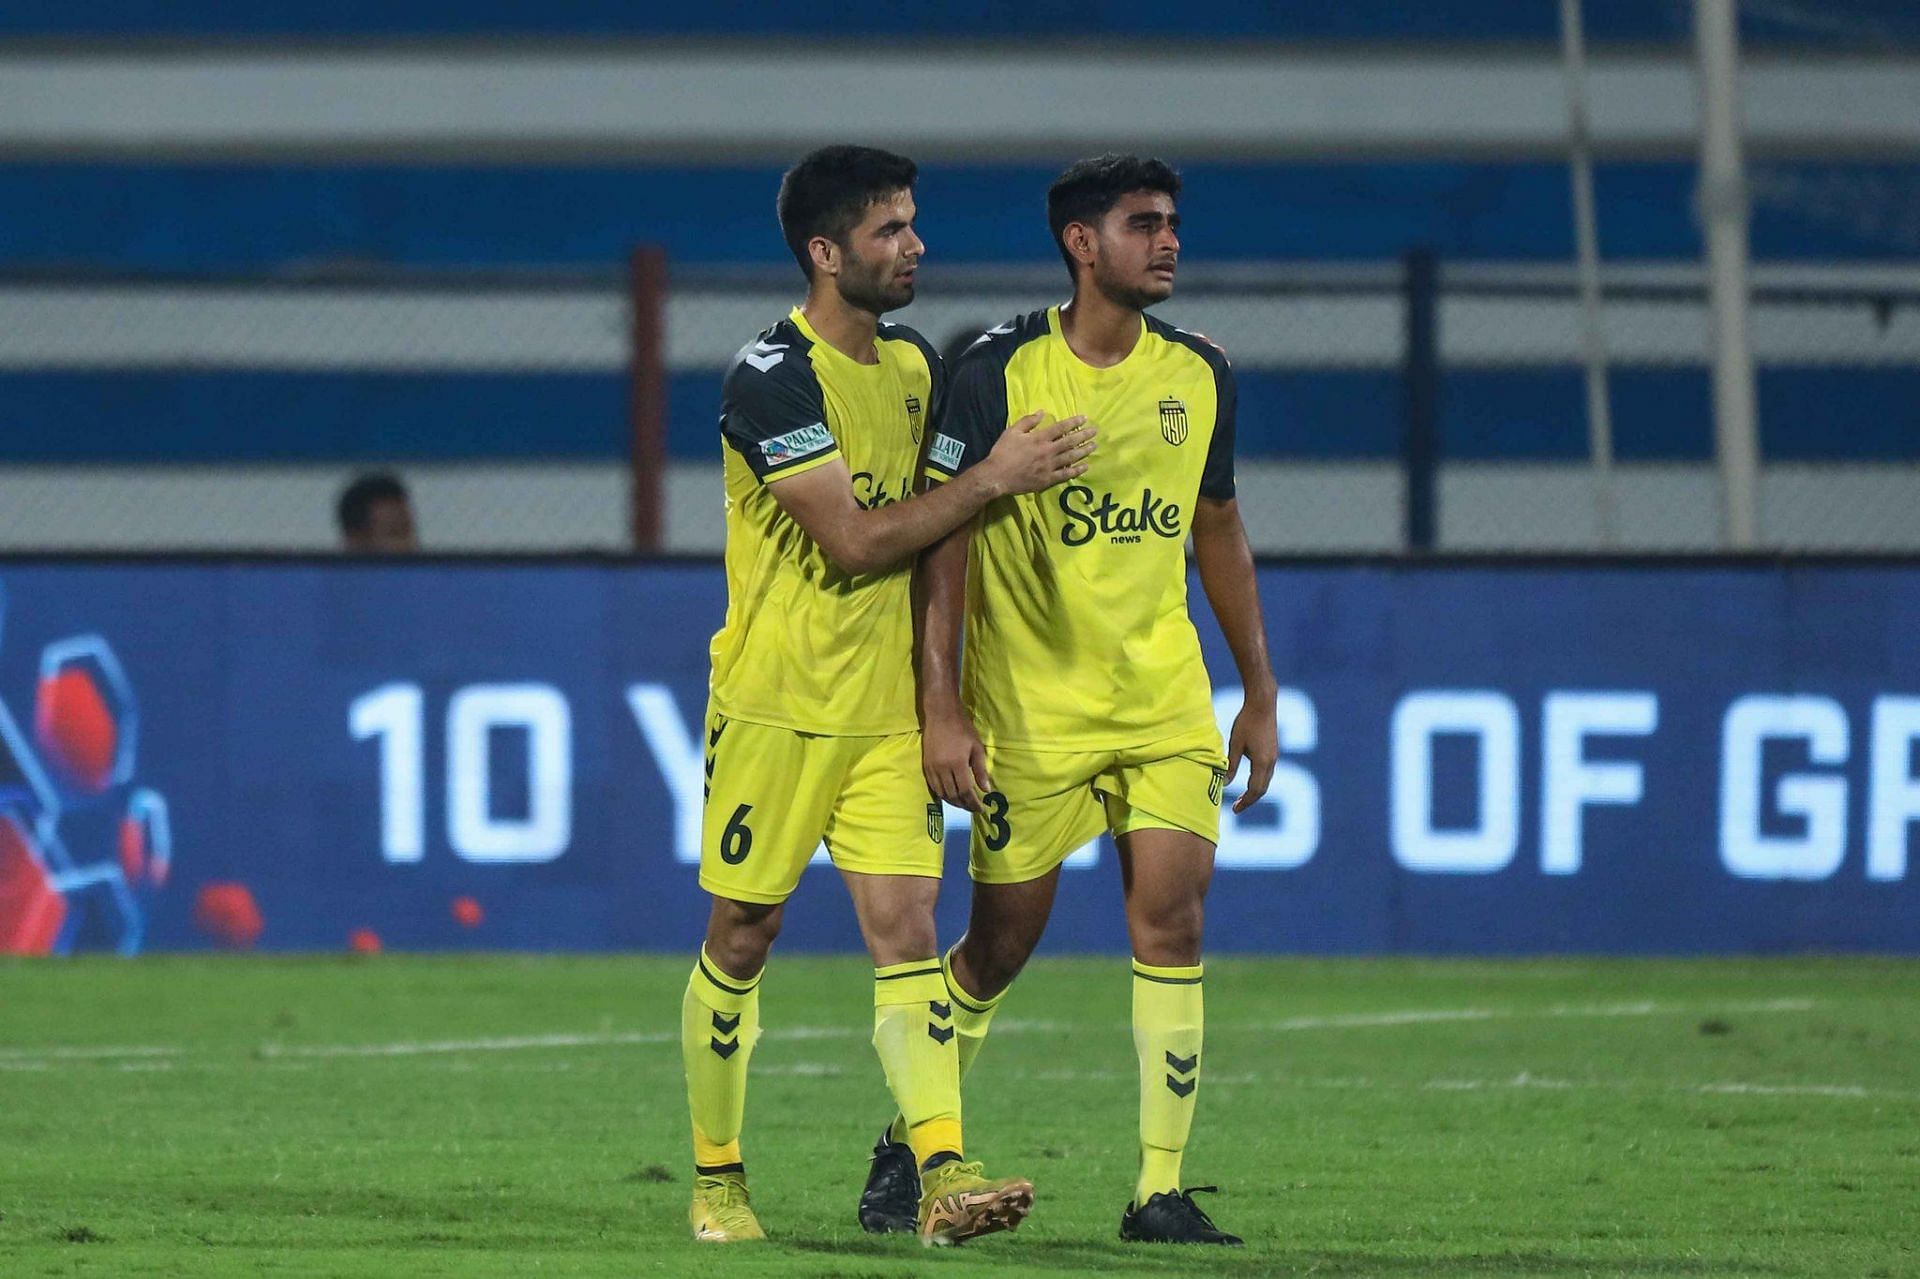 Can Hyderabad FC pick up their first win of the season against fellow strugglers Punjab FC?